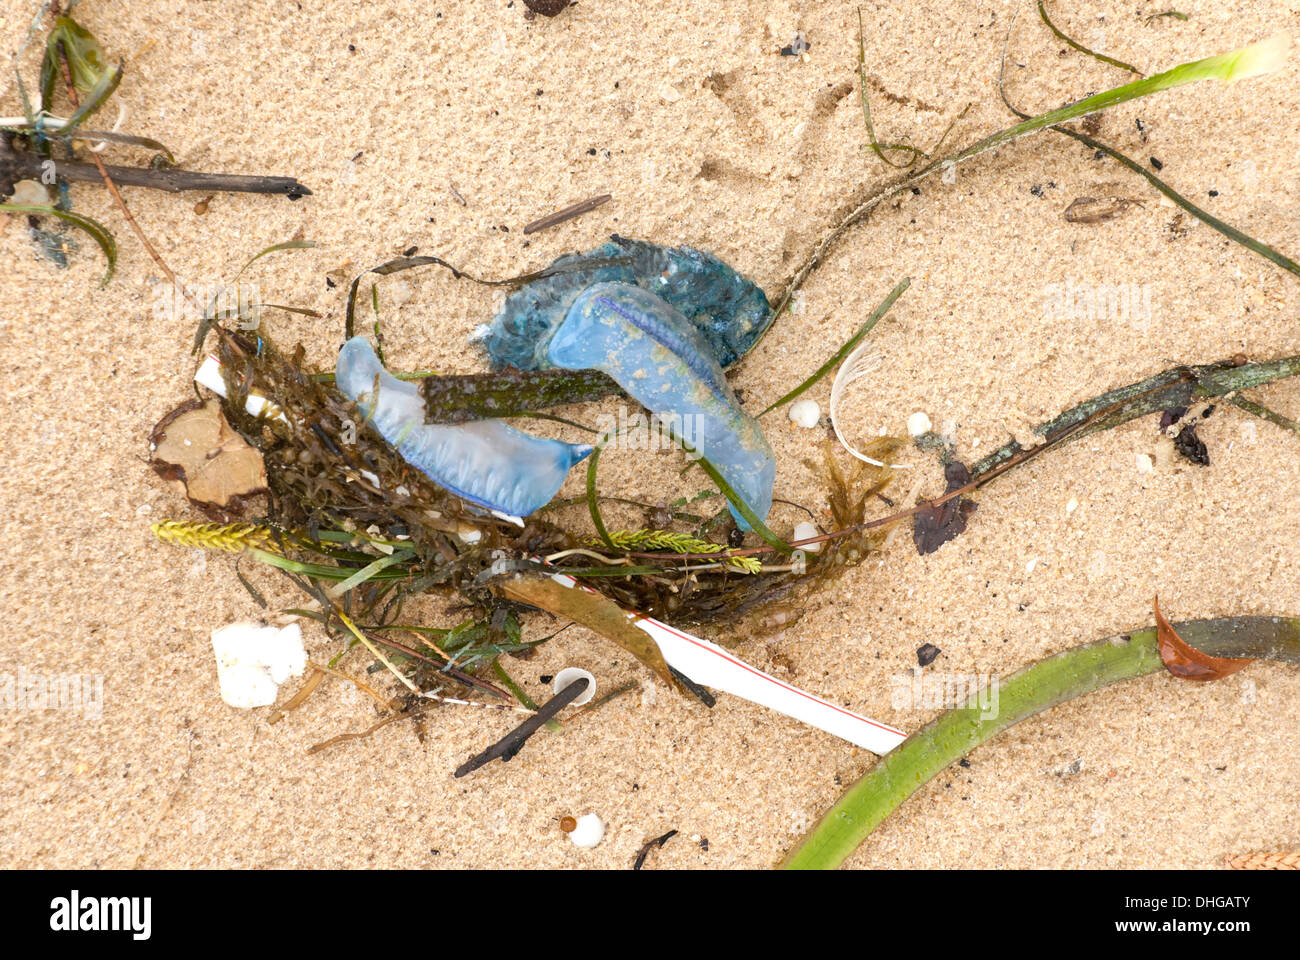 Seaweed and bluebottle jellyfish washed up on an Australian beach after a storm Stock Photo